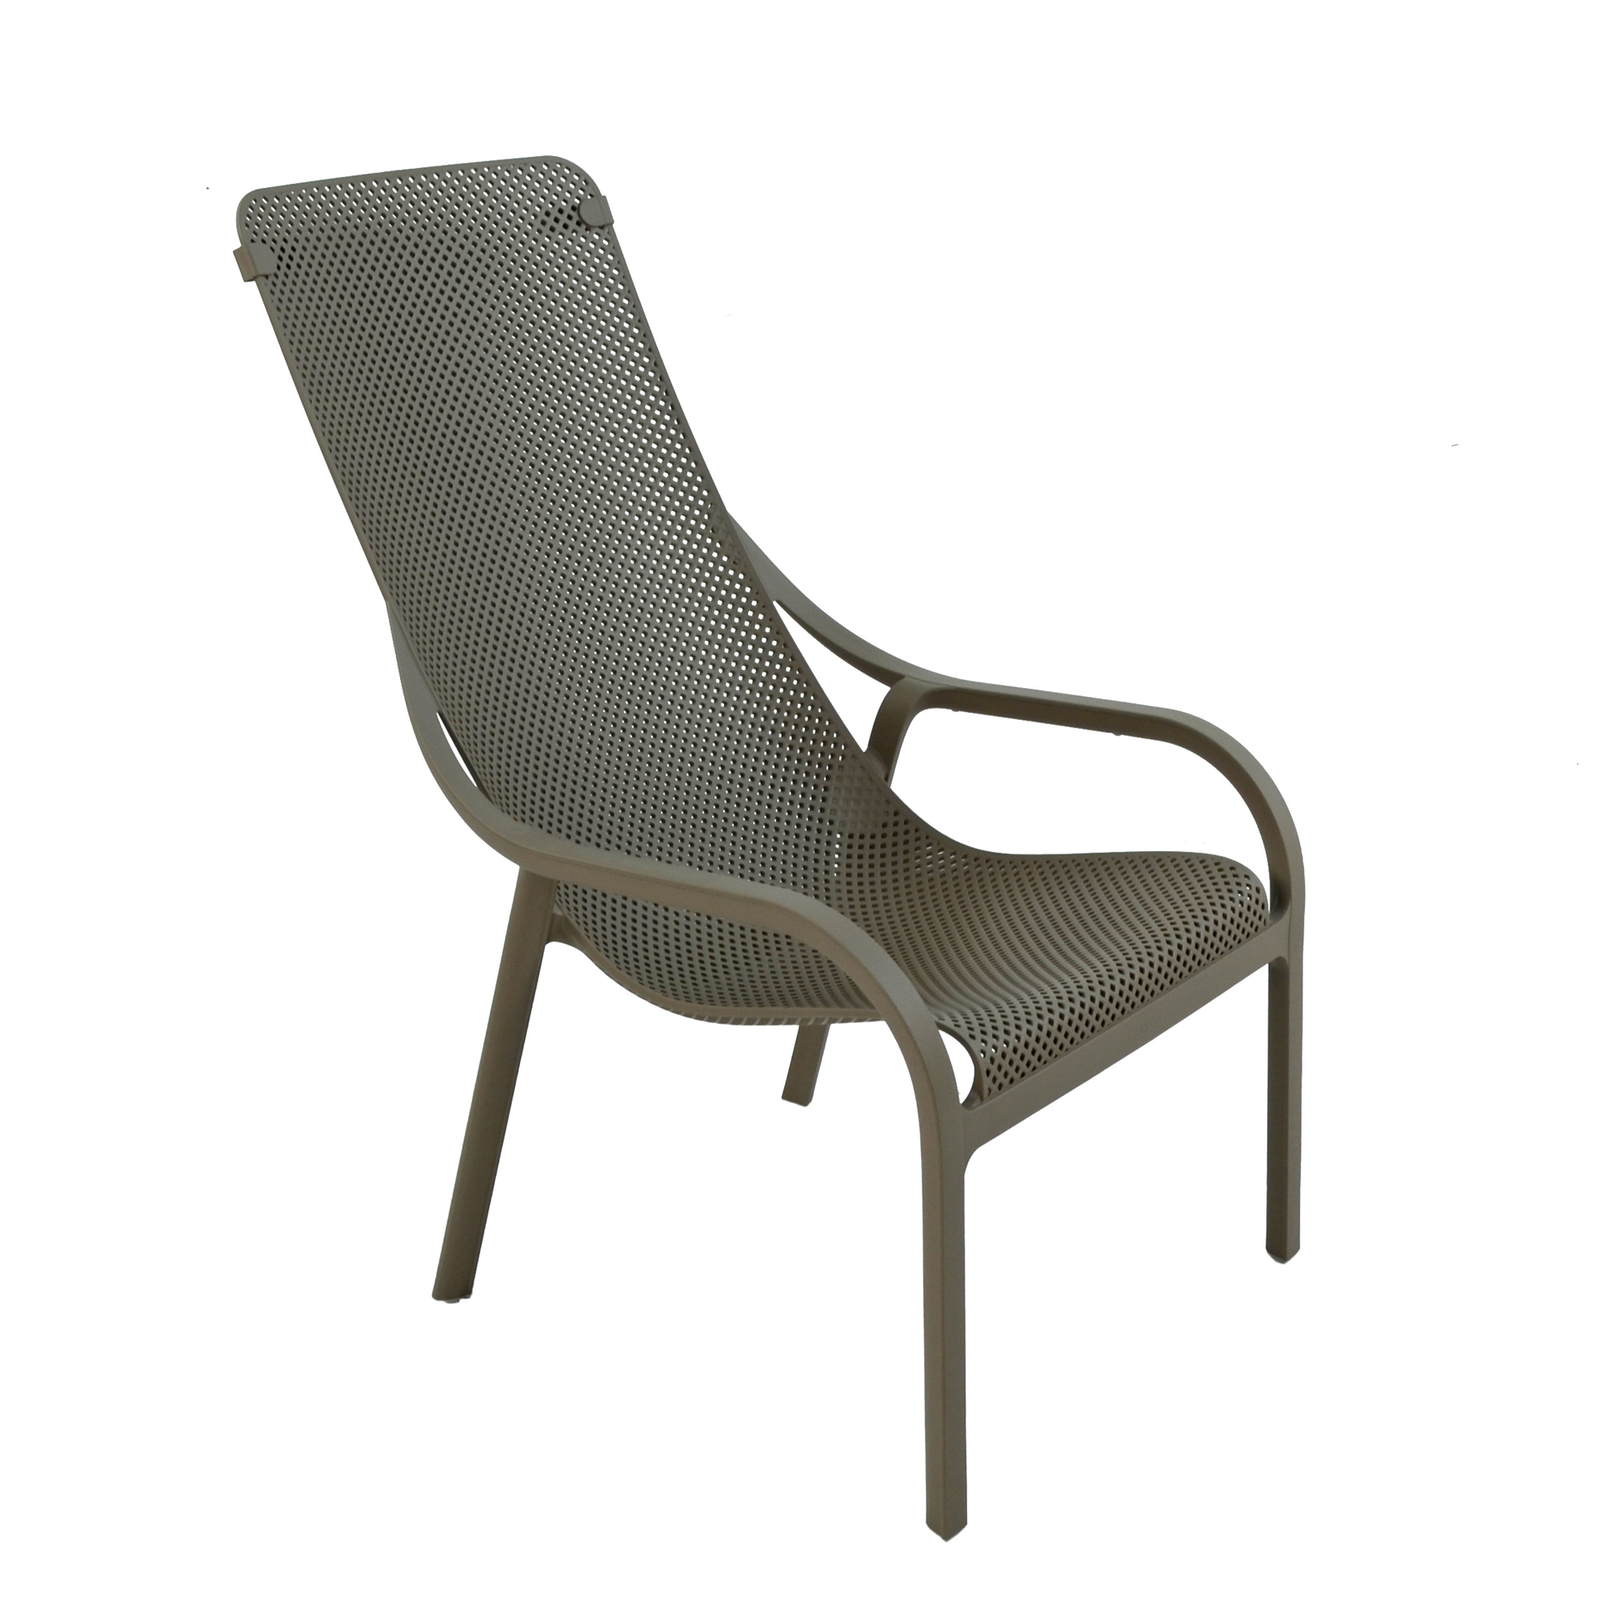 Nardi Net Lounge Garden Chair in Turtle Dove Grey (Pack of 2) Chairs Nardi   